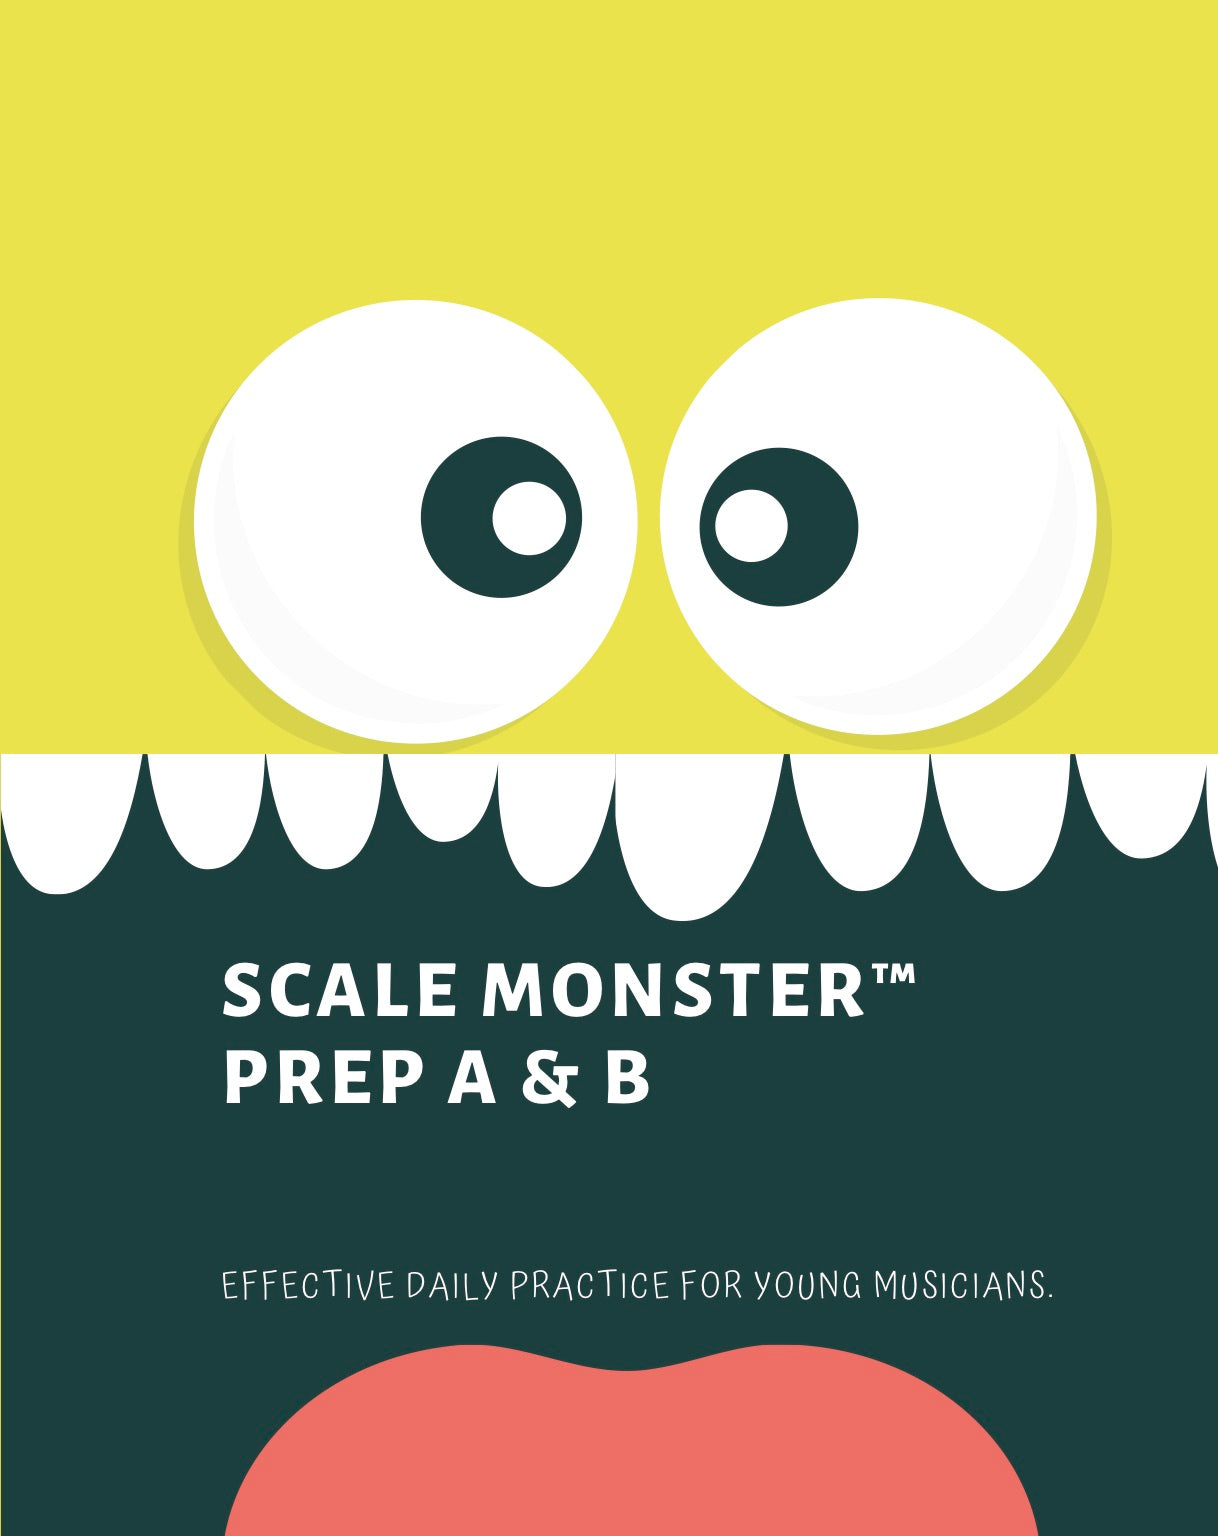 Scale Monster Prep A and B